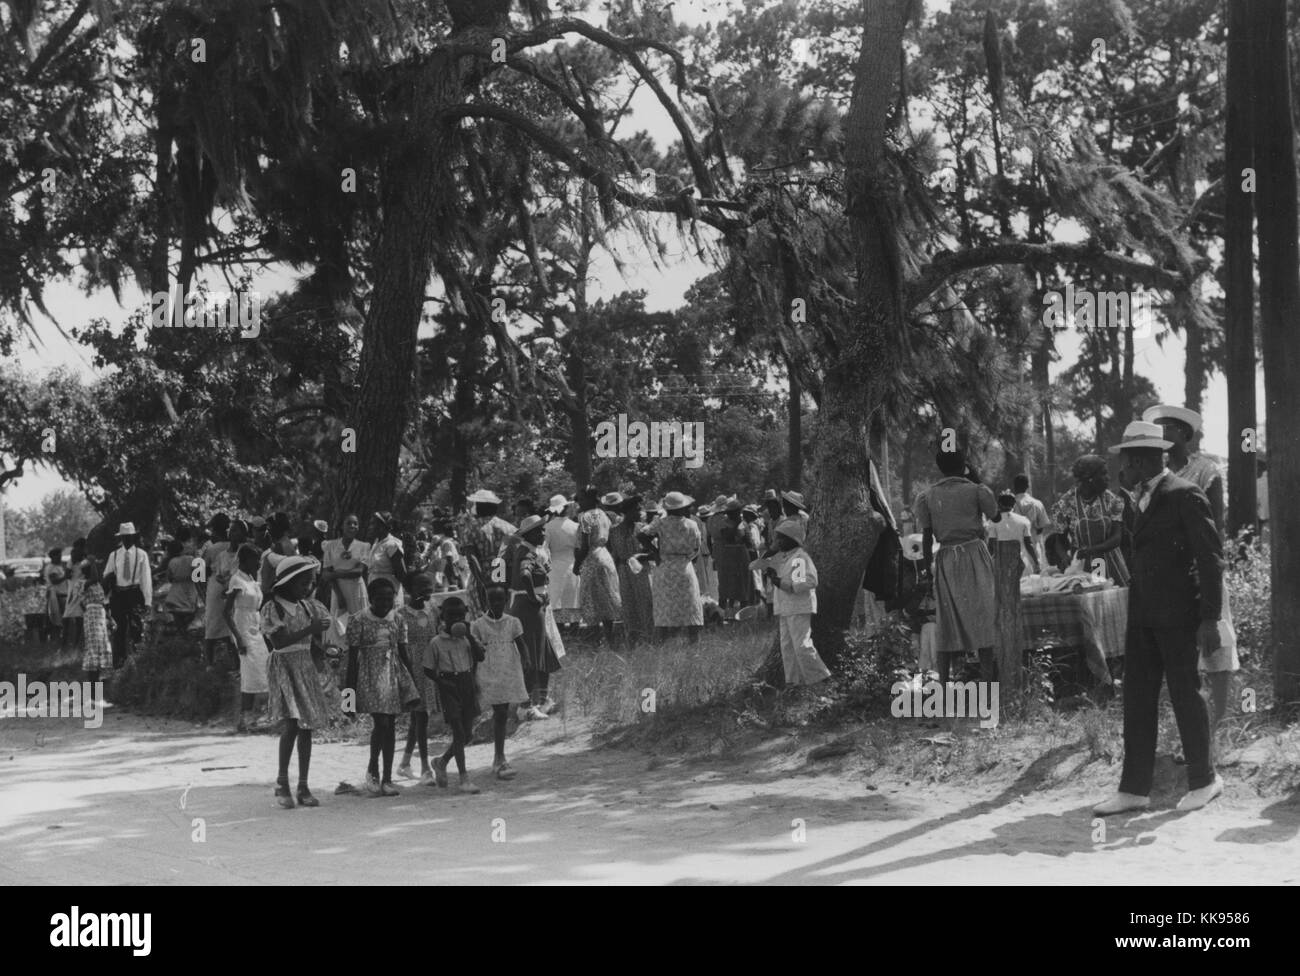 A photograph of a large group of people gathered for a Fourth of July celebration, the group consists of men, women and children, everyone is dress in seaonsally appropriate formal clothing, the men are wearing suits, ties and light colored hats, the women wear light dresses, they are gathered at the edge of a wooded area, someone has set up a table with food on the right hand side of the photograph, St. Helena Island, South Carolina, 1877. From the New York Public Library. Stock Photo